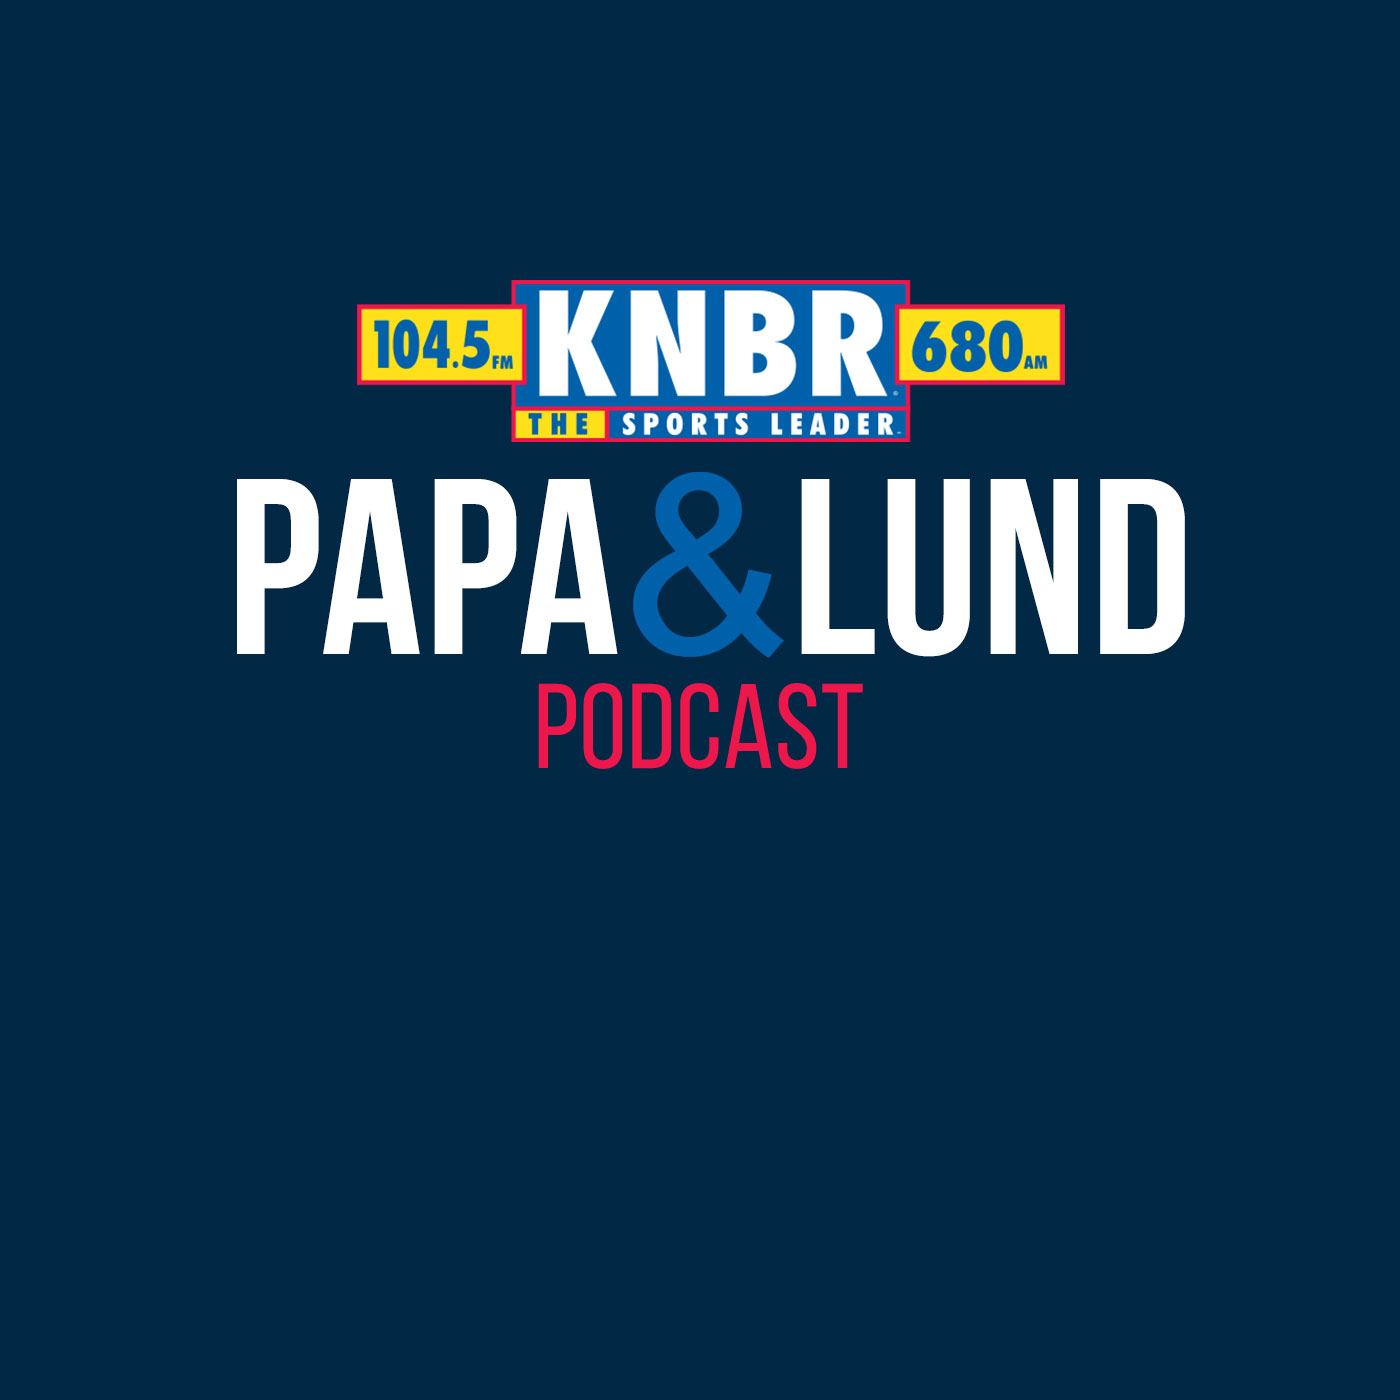 8-3 Boyd Robertson joins Papa & Lund to give us a behind the screens look at working the Booth with Vin Scully and shares memories from those many years they shared together